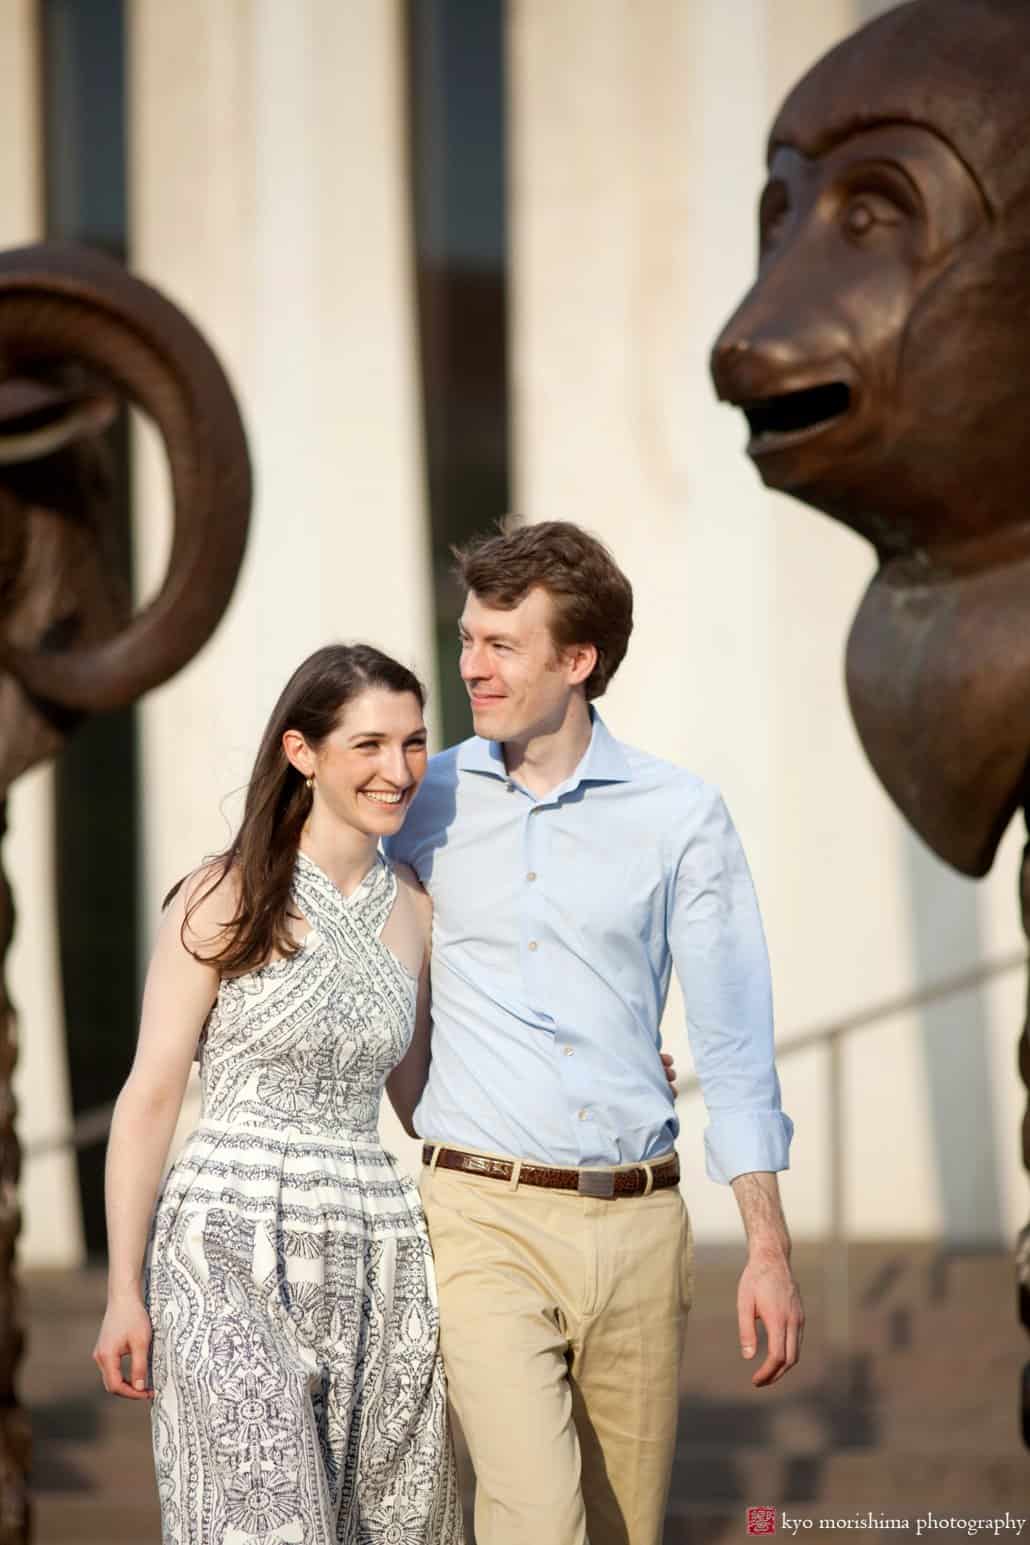 Princeton University Art Museum engagement photo with sculptures by Ai Weiwei in the background, photographed by Kyo Morishima